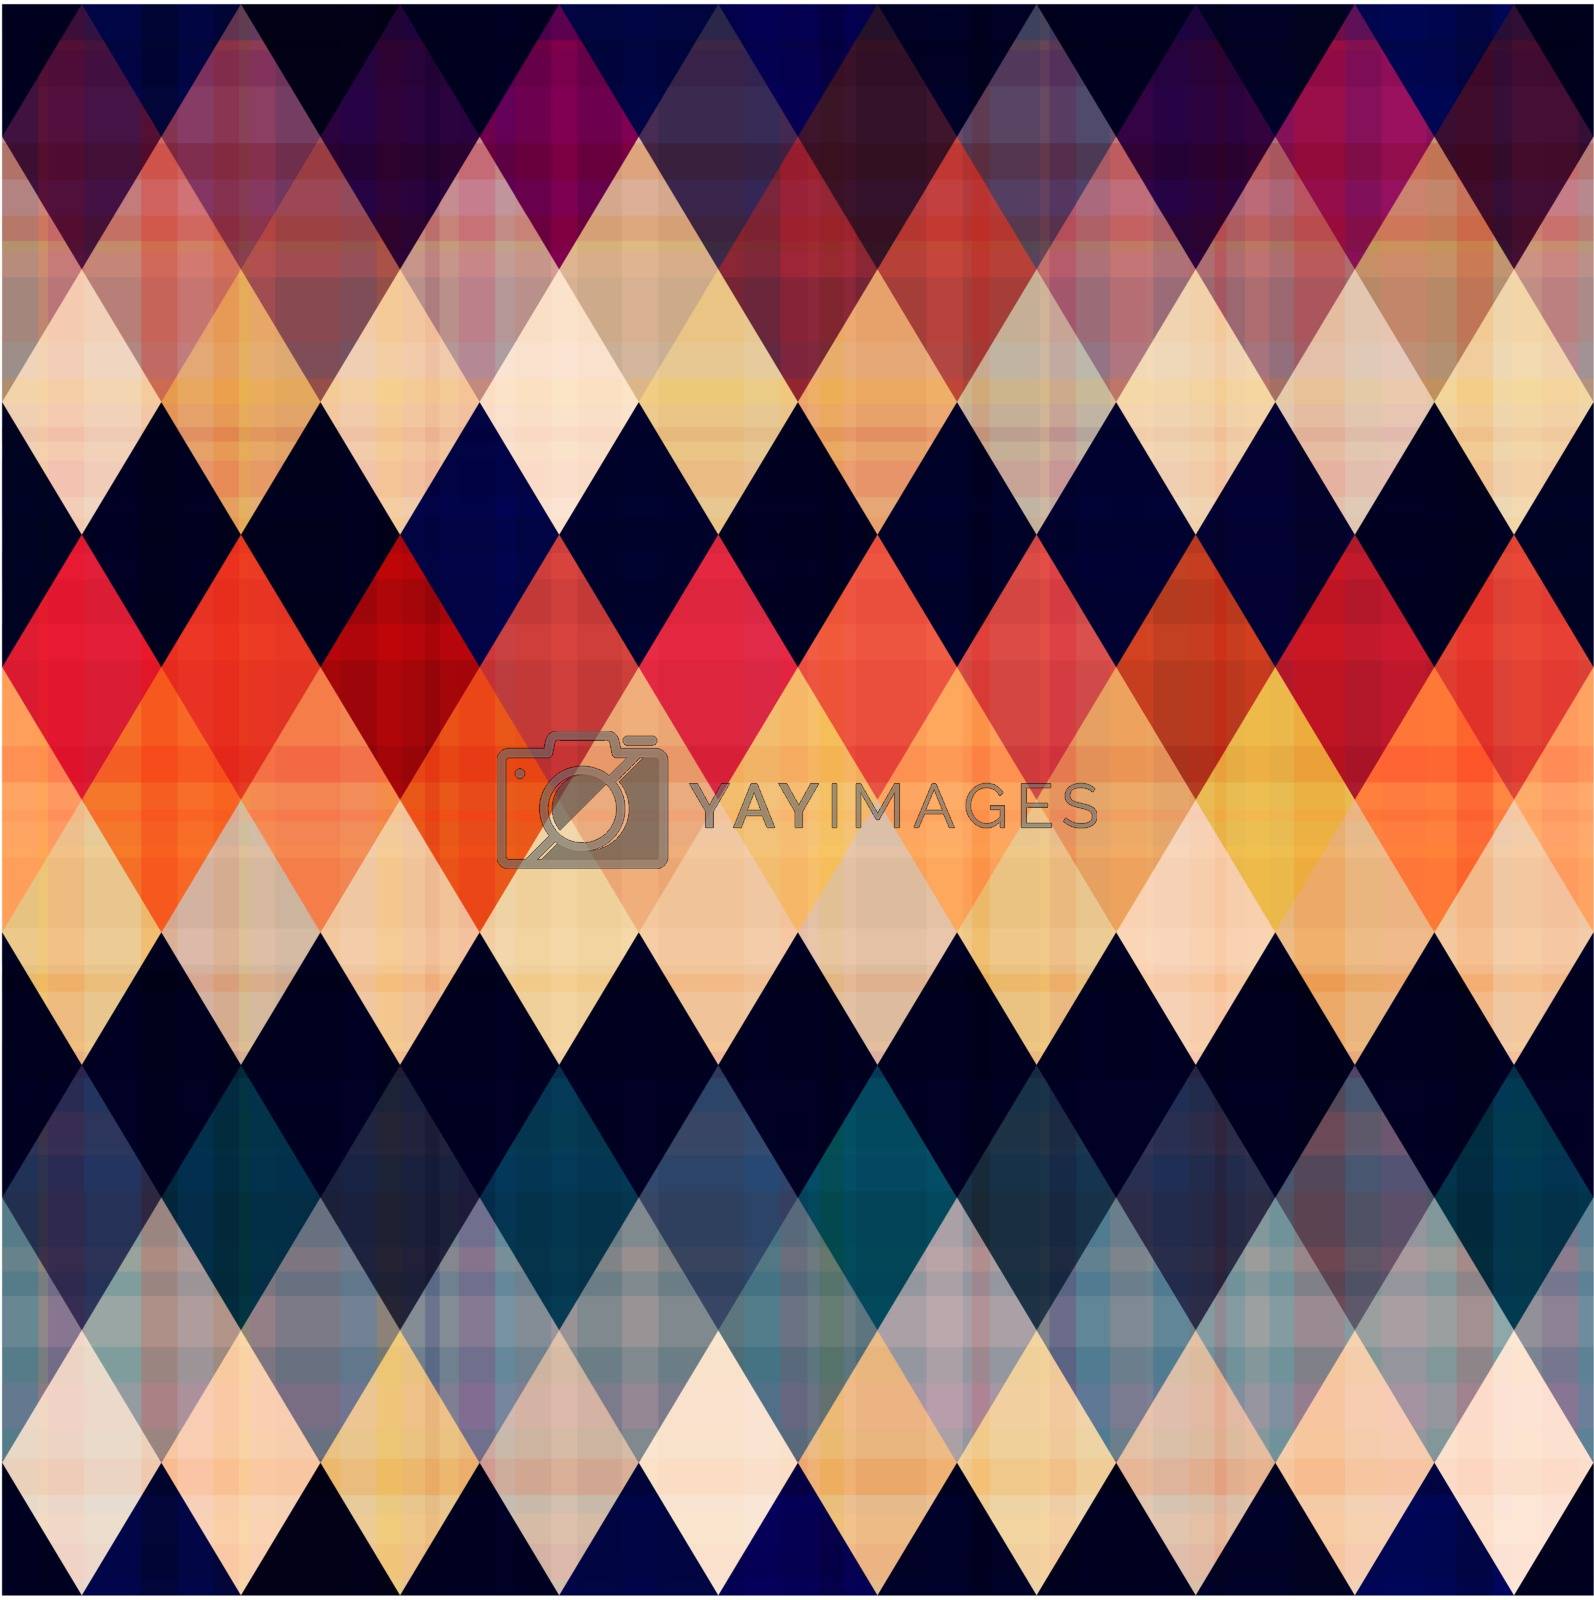 Royalty free image of colorful seamless argyle pattern by pauljune